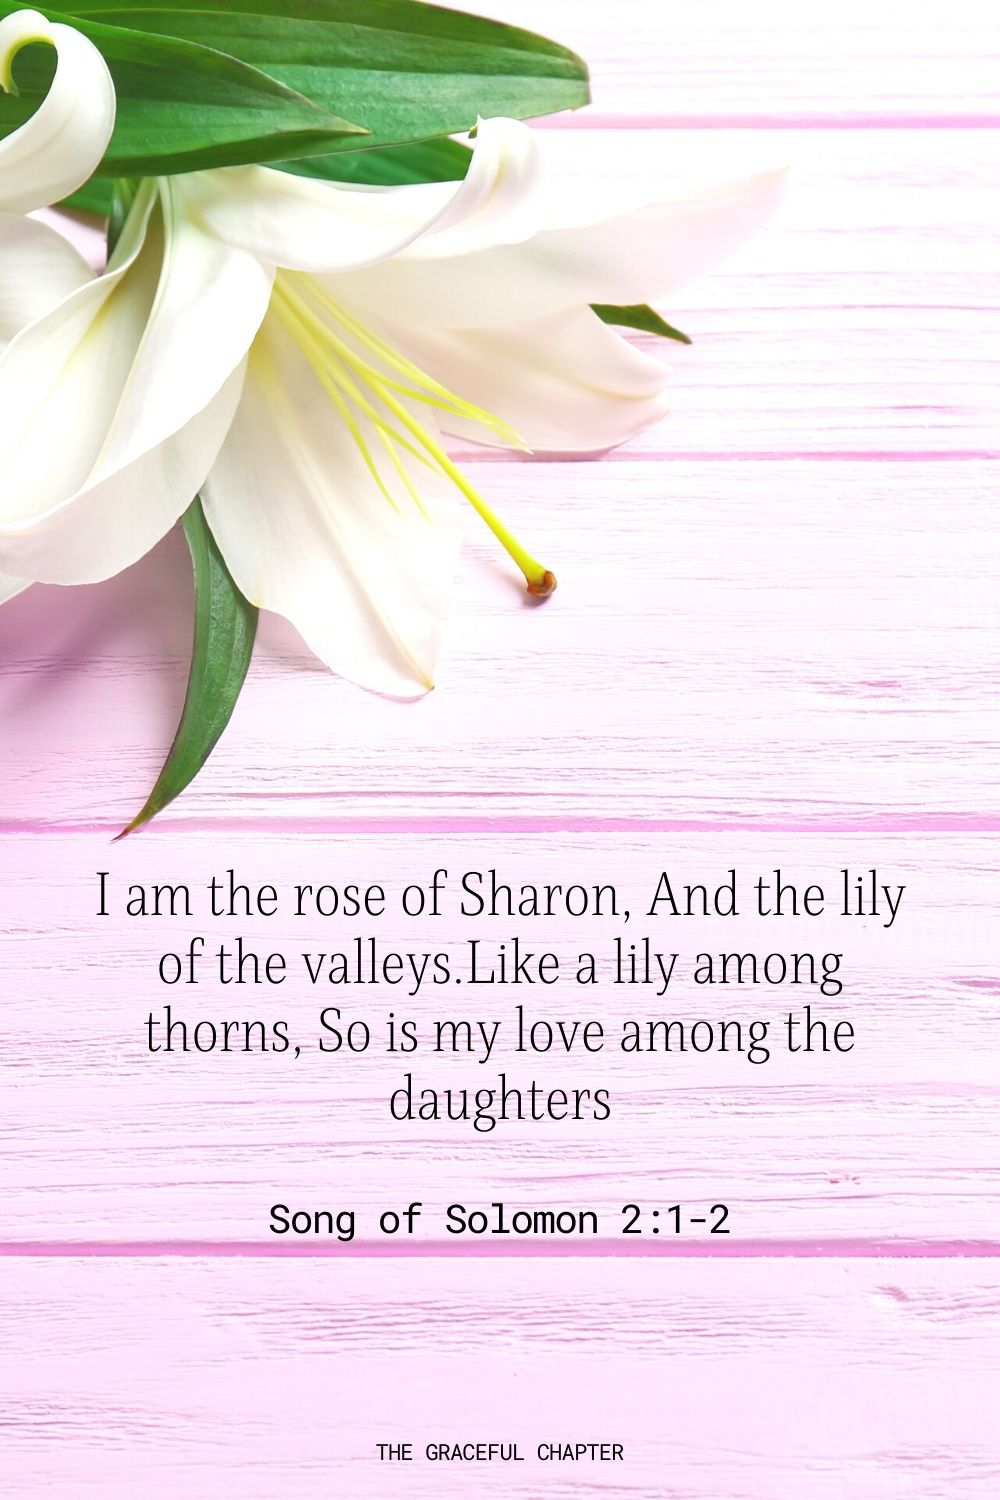 I am the rose of Sharon, And the lily of the valleys.Like a lily among thorns, So is my love among the daughters. Song of Solomon 2:1-2